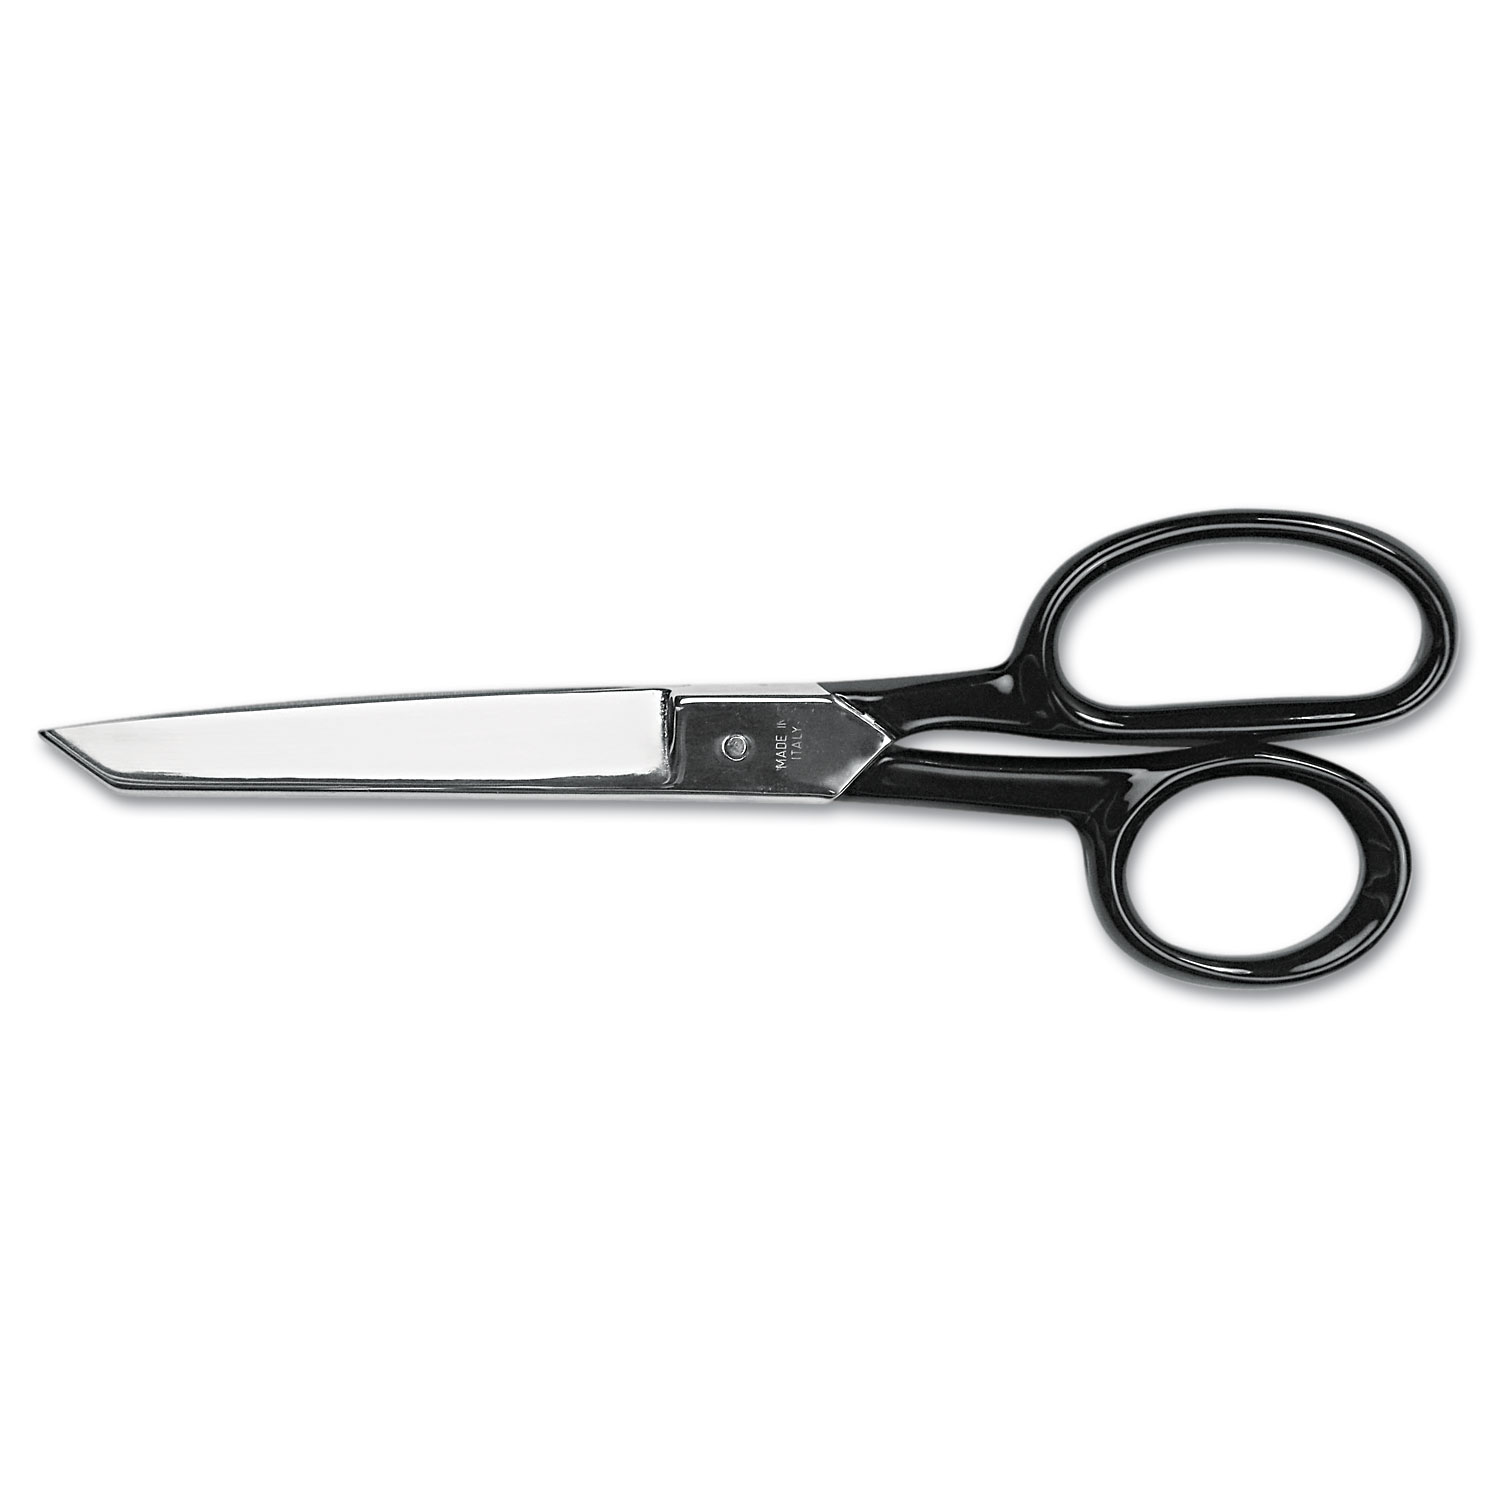  Clauss 10260 Hot Forged Carbon Steel Shears, 8 Long, 3.88 Cut Length, Black Straight Handle (ACM10260) 